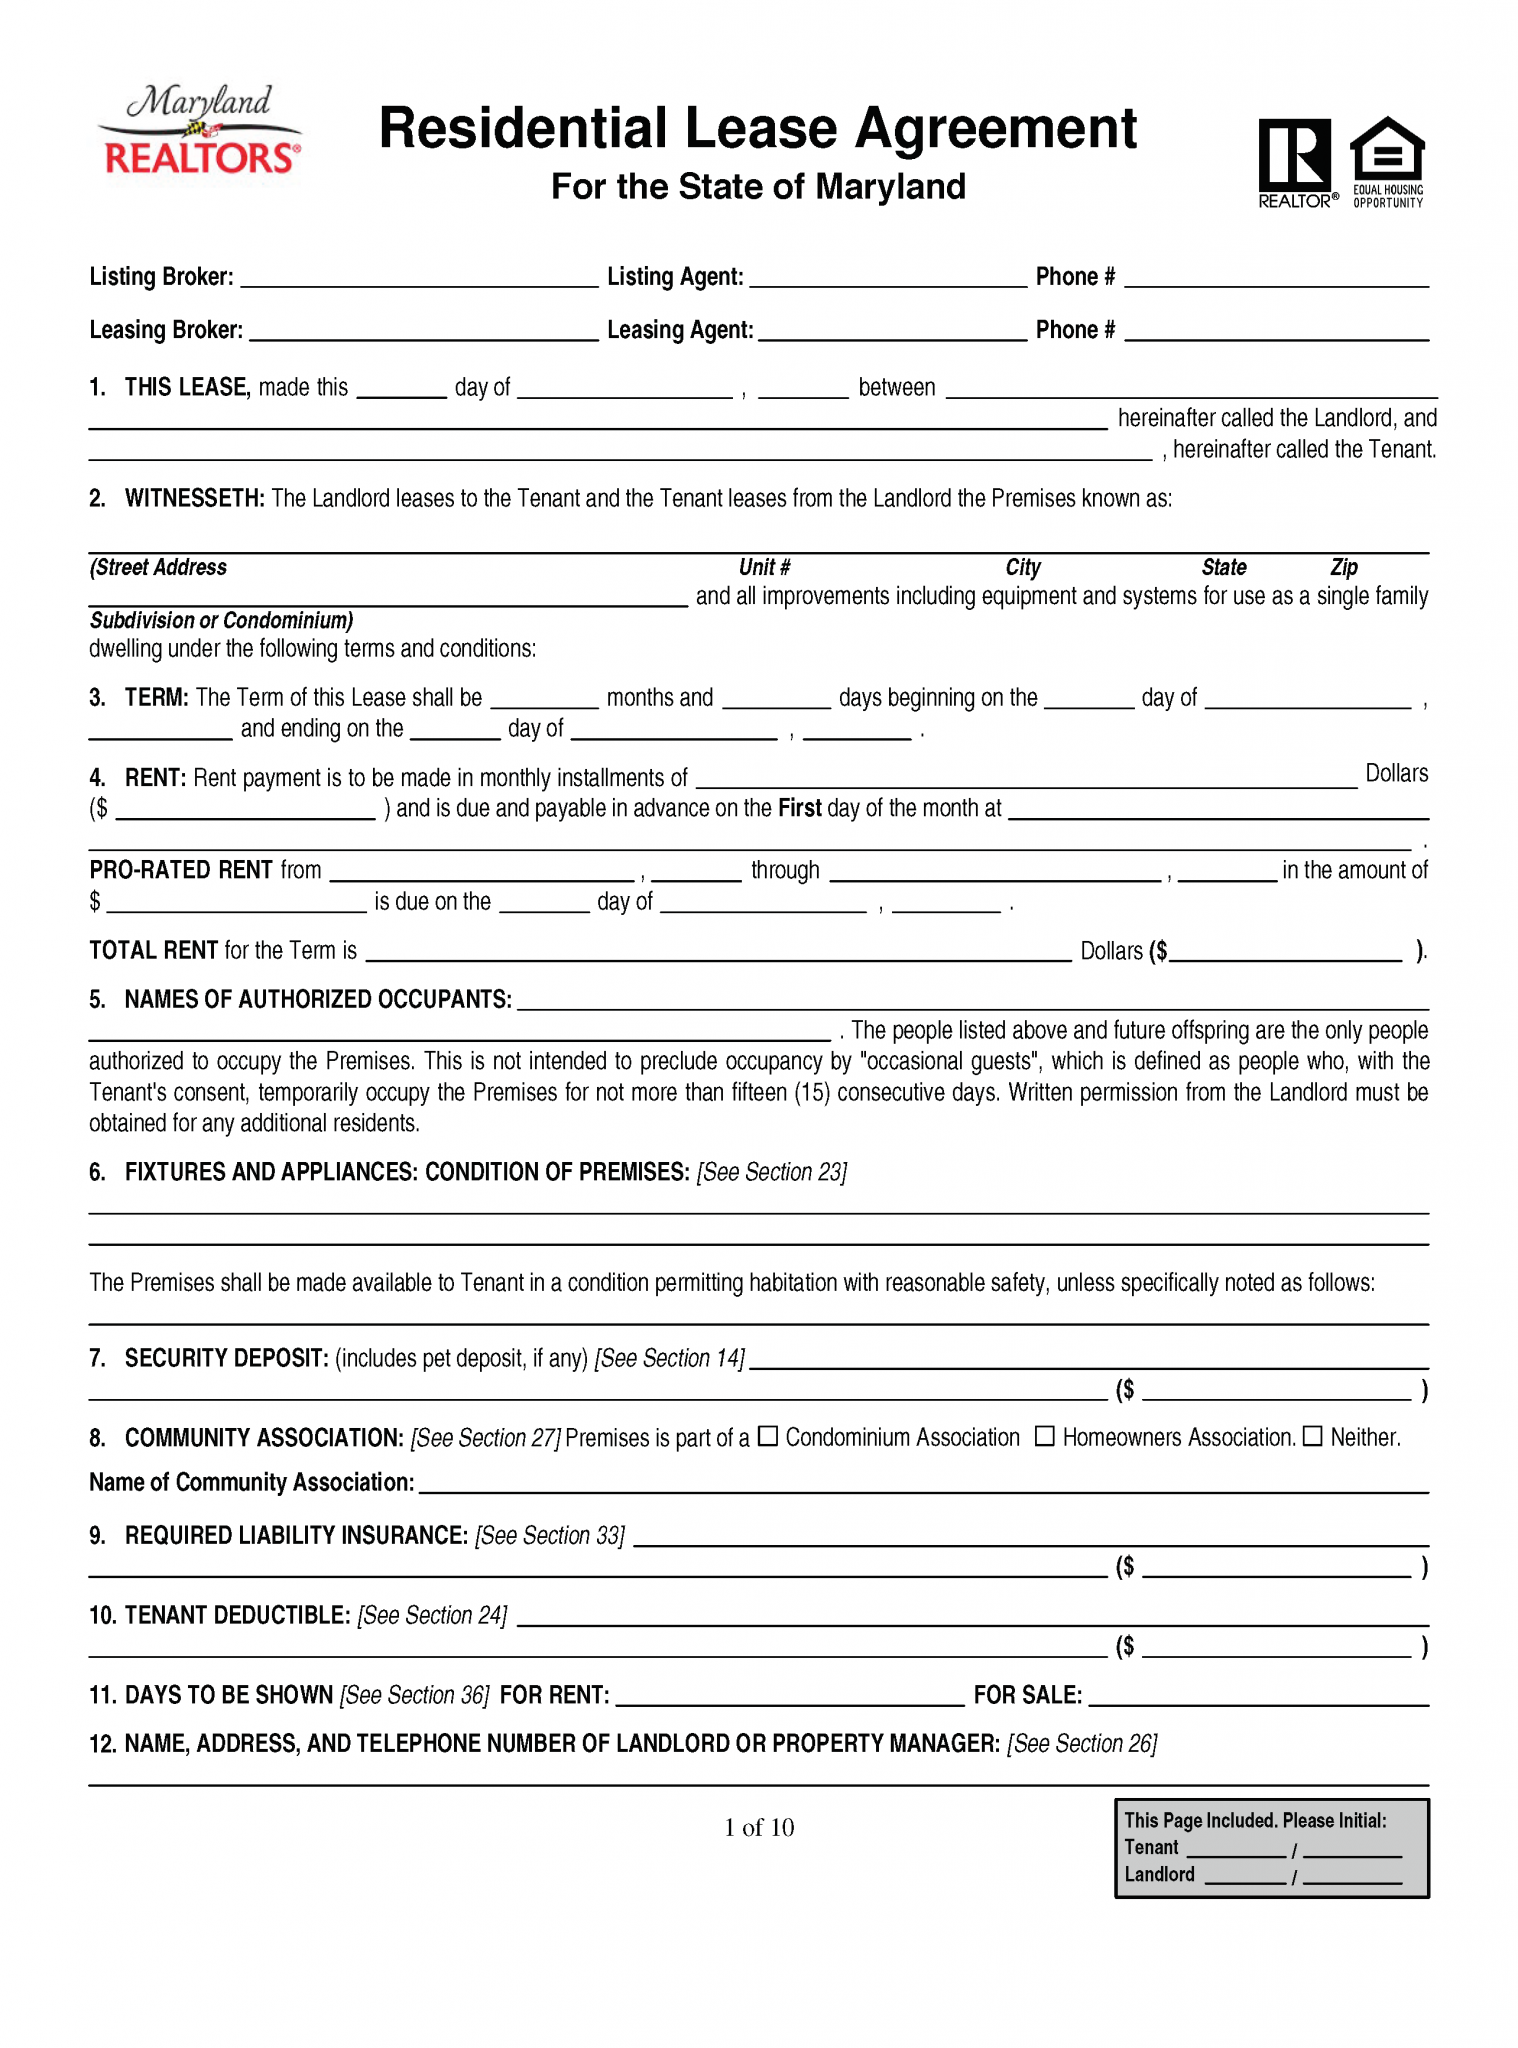 Free Maryland Residential Lease Agreement PDF